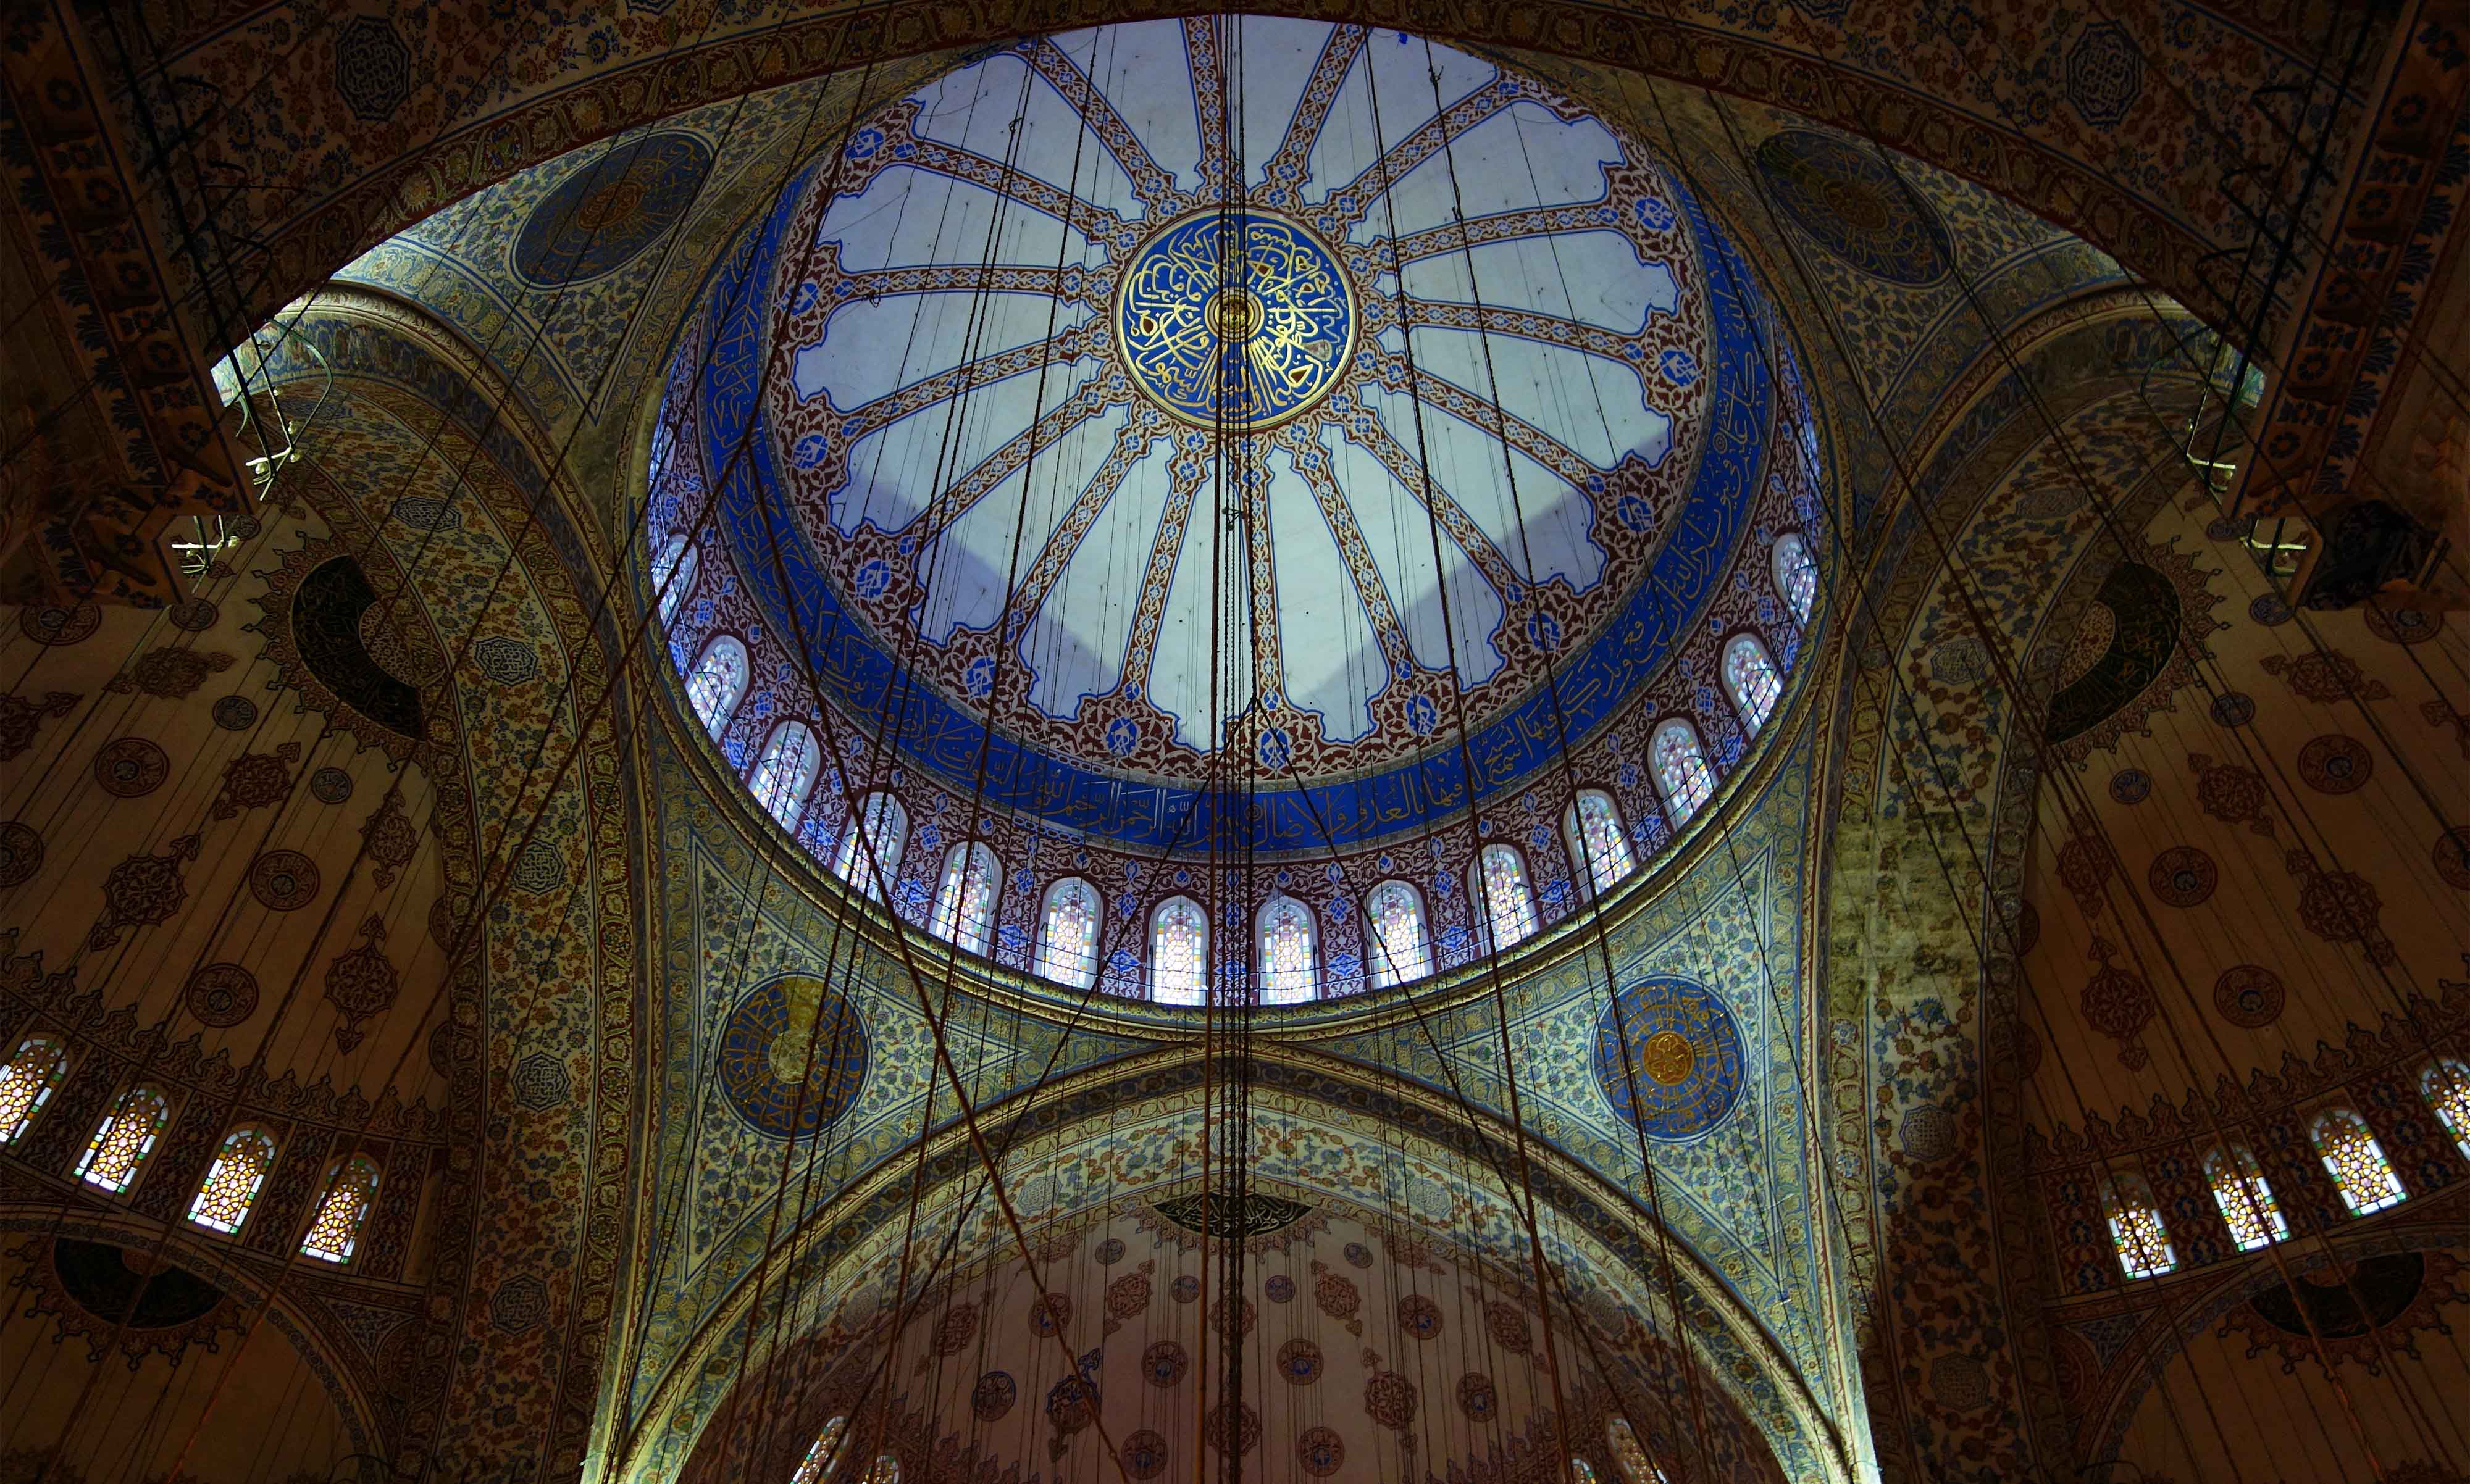 Sedefkâr Mehmed Ağa, Dome, Blue Mosque (Sultan Ahmed Mosque), completed 1617, Istanbul (photo: Steven Zucker, CC BY-NC-SA 2.0)